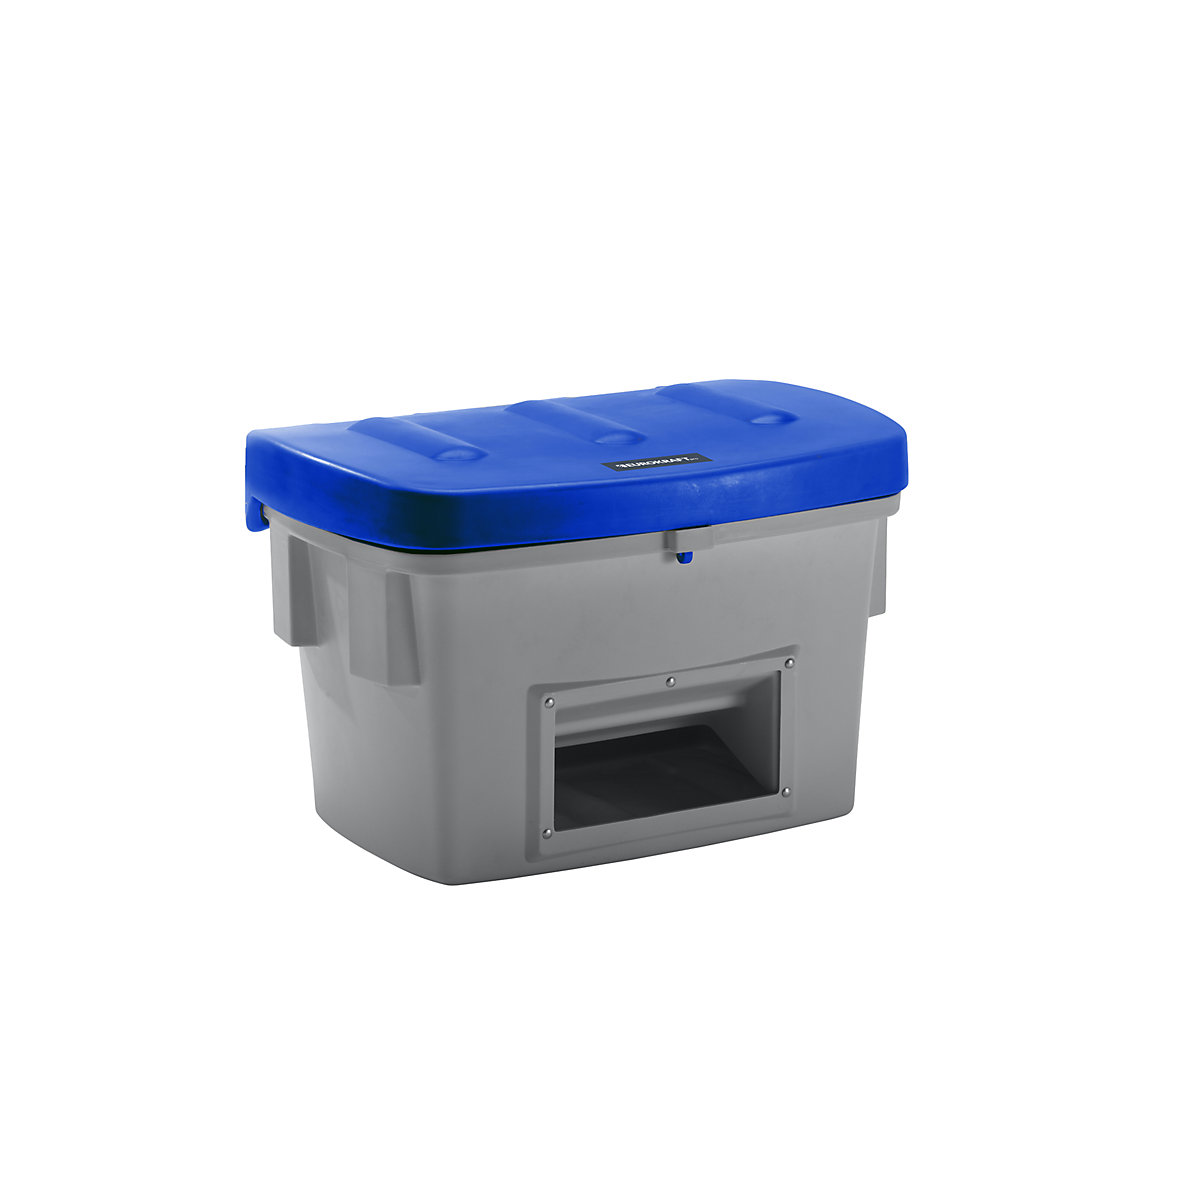 Universal / grit container – eurokraft pro, with dispenser opening, 200 l, blue lid-7